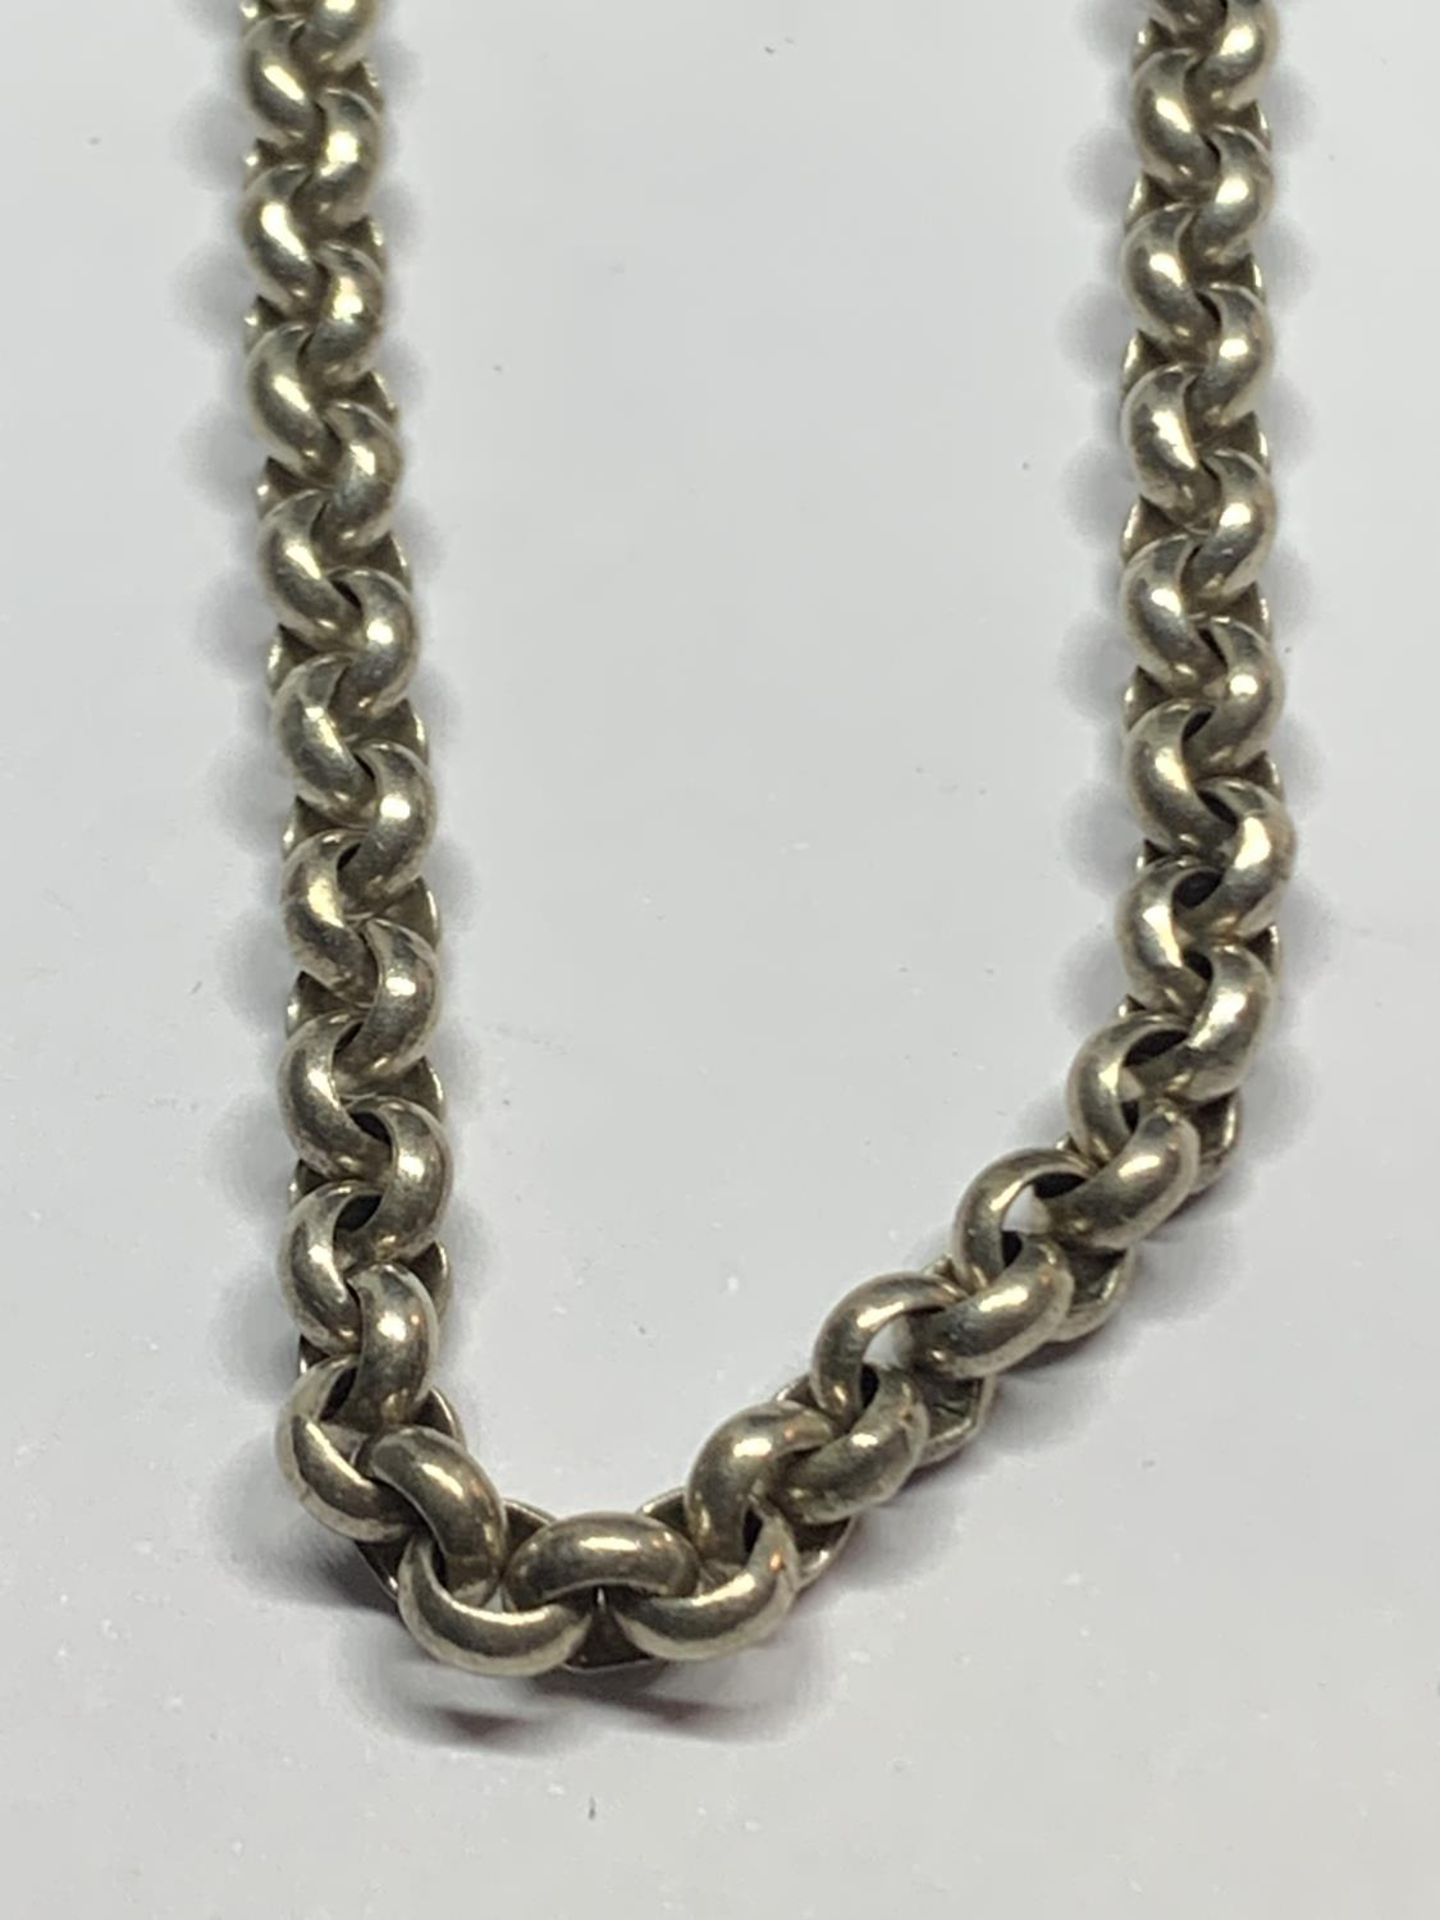 A 22" SILVER BELCHER NECK CHAIN - Image 2 of 3